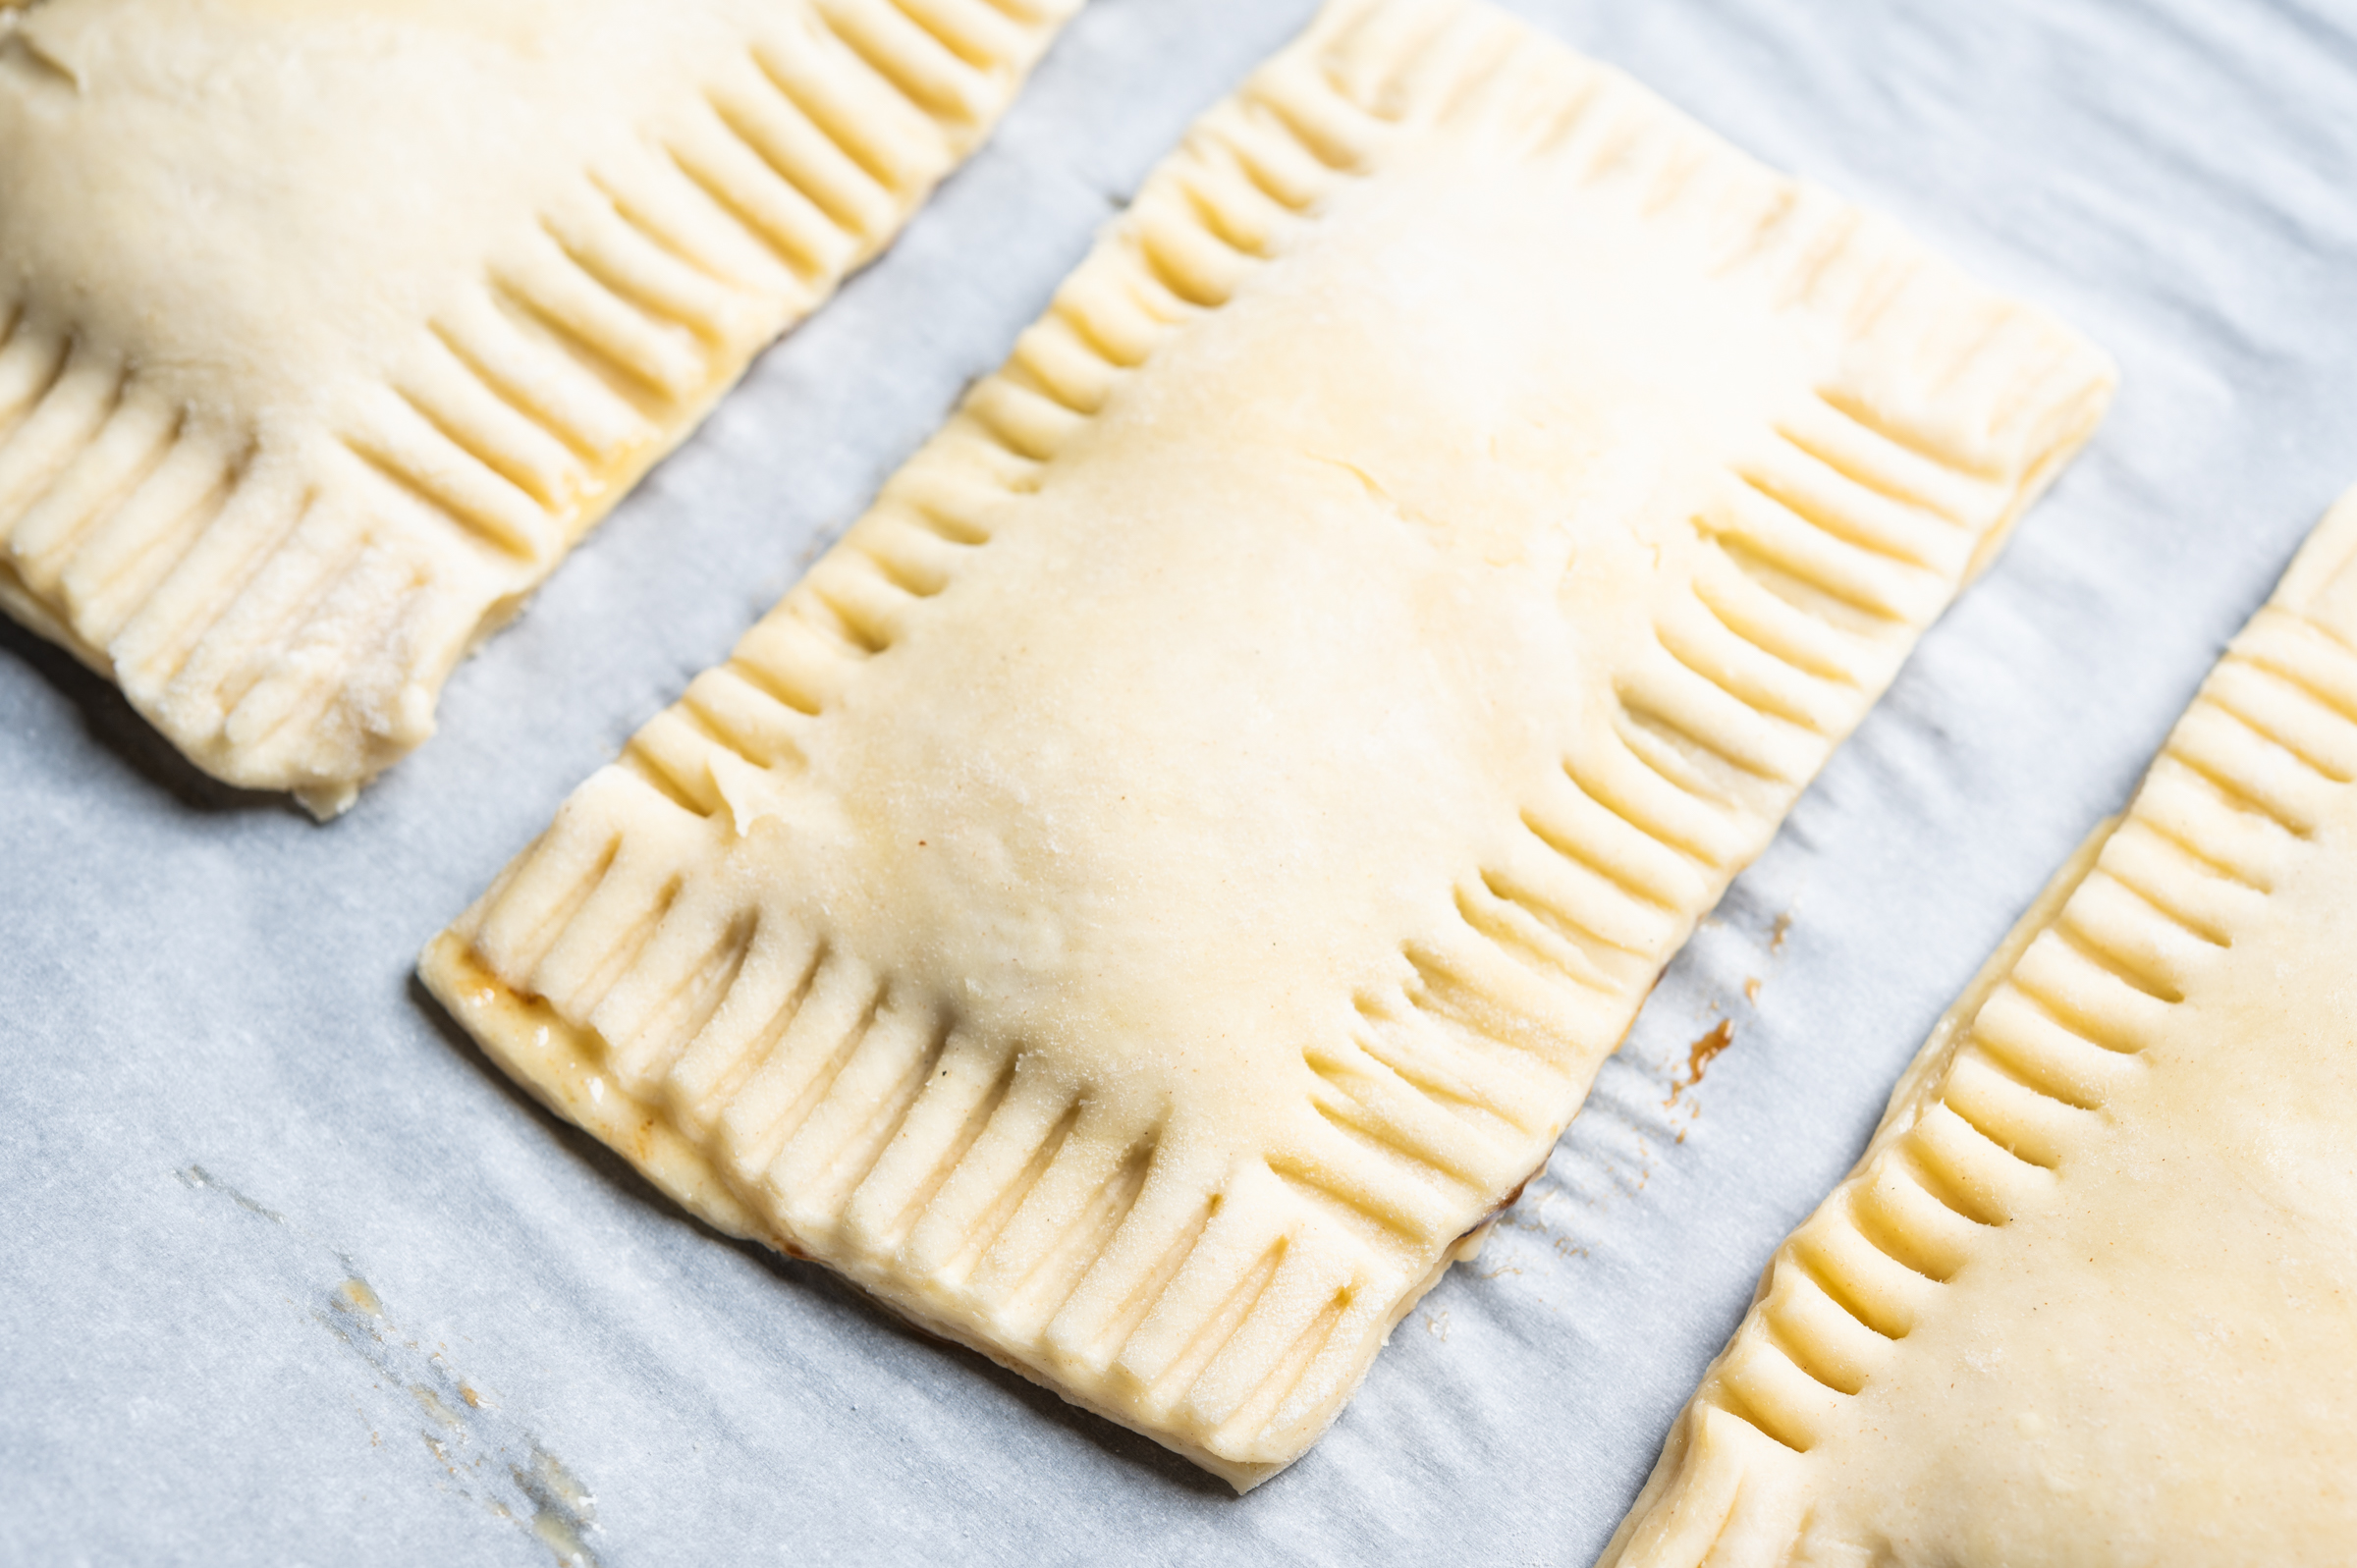 Crimped pastry edges, ready for baking